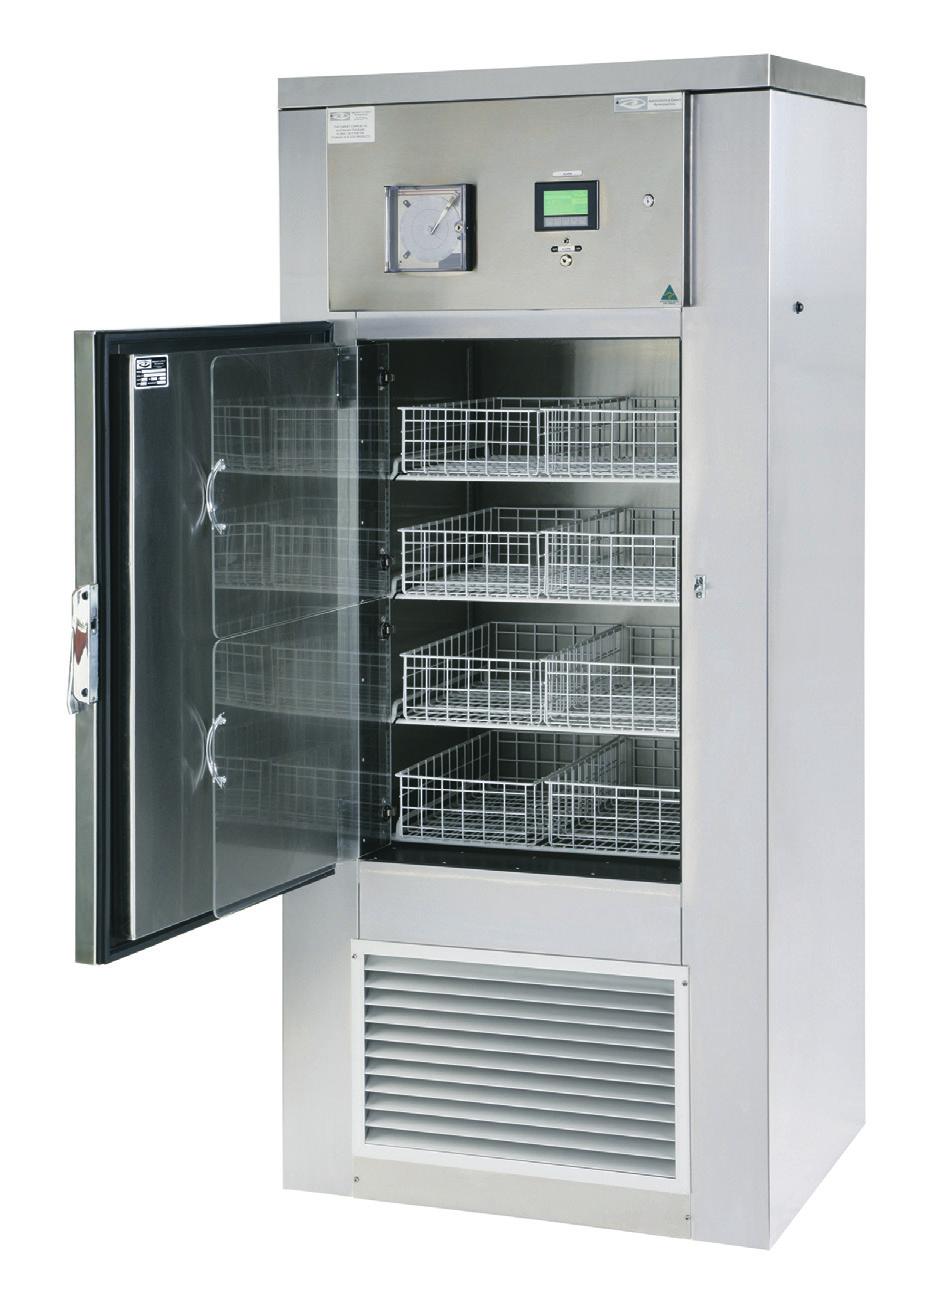 Ext Depth 815mm Ext Height 2015mm Fresh Frozen Plasma (FFP) Freezers operate on refrigerant to -35 c and